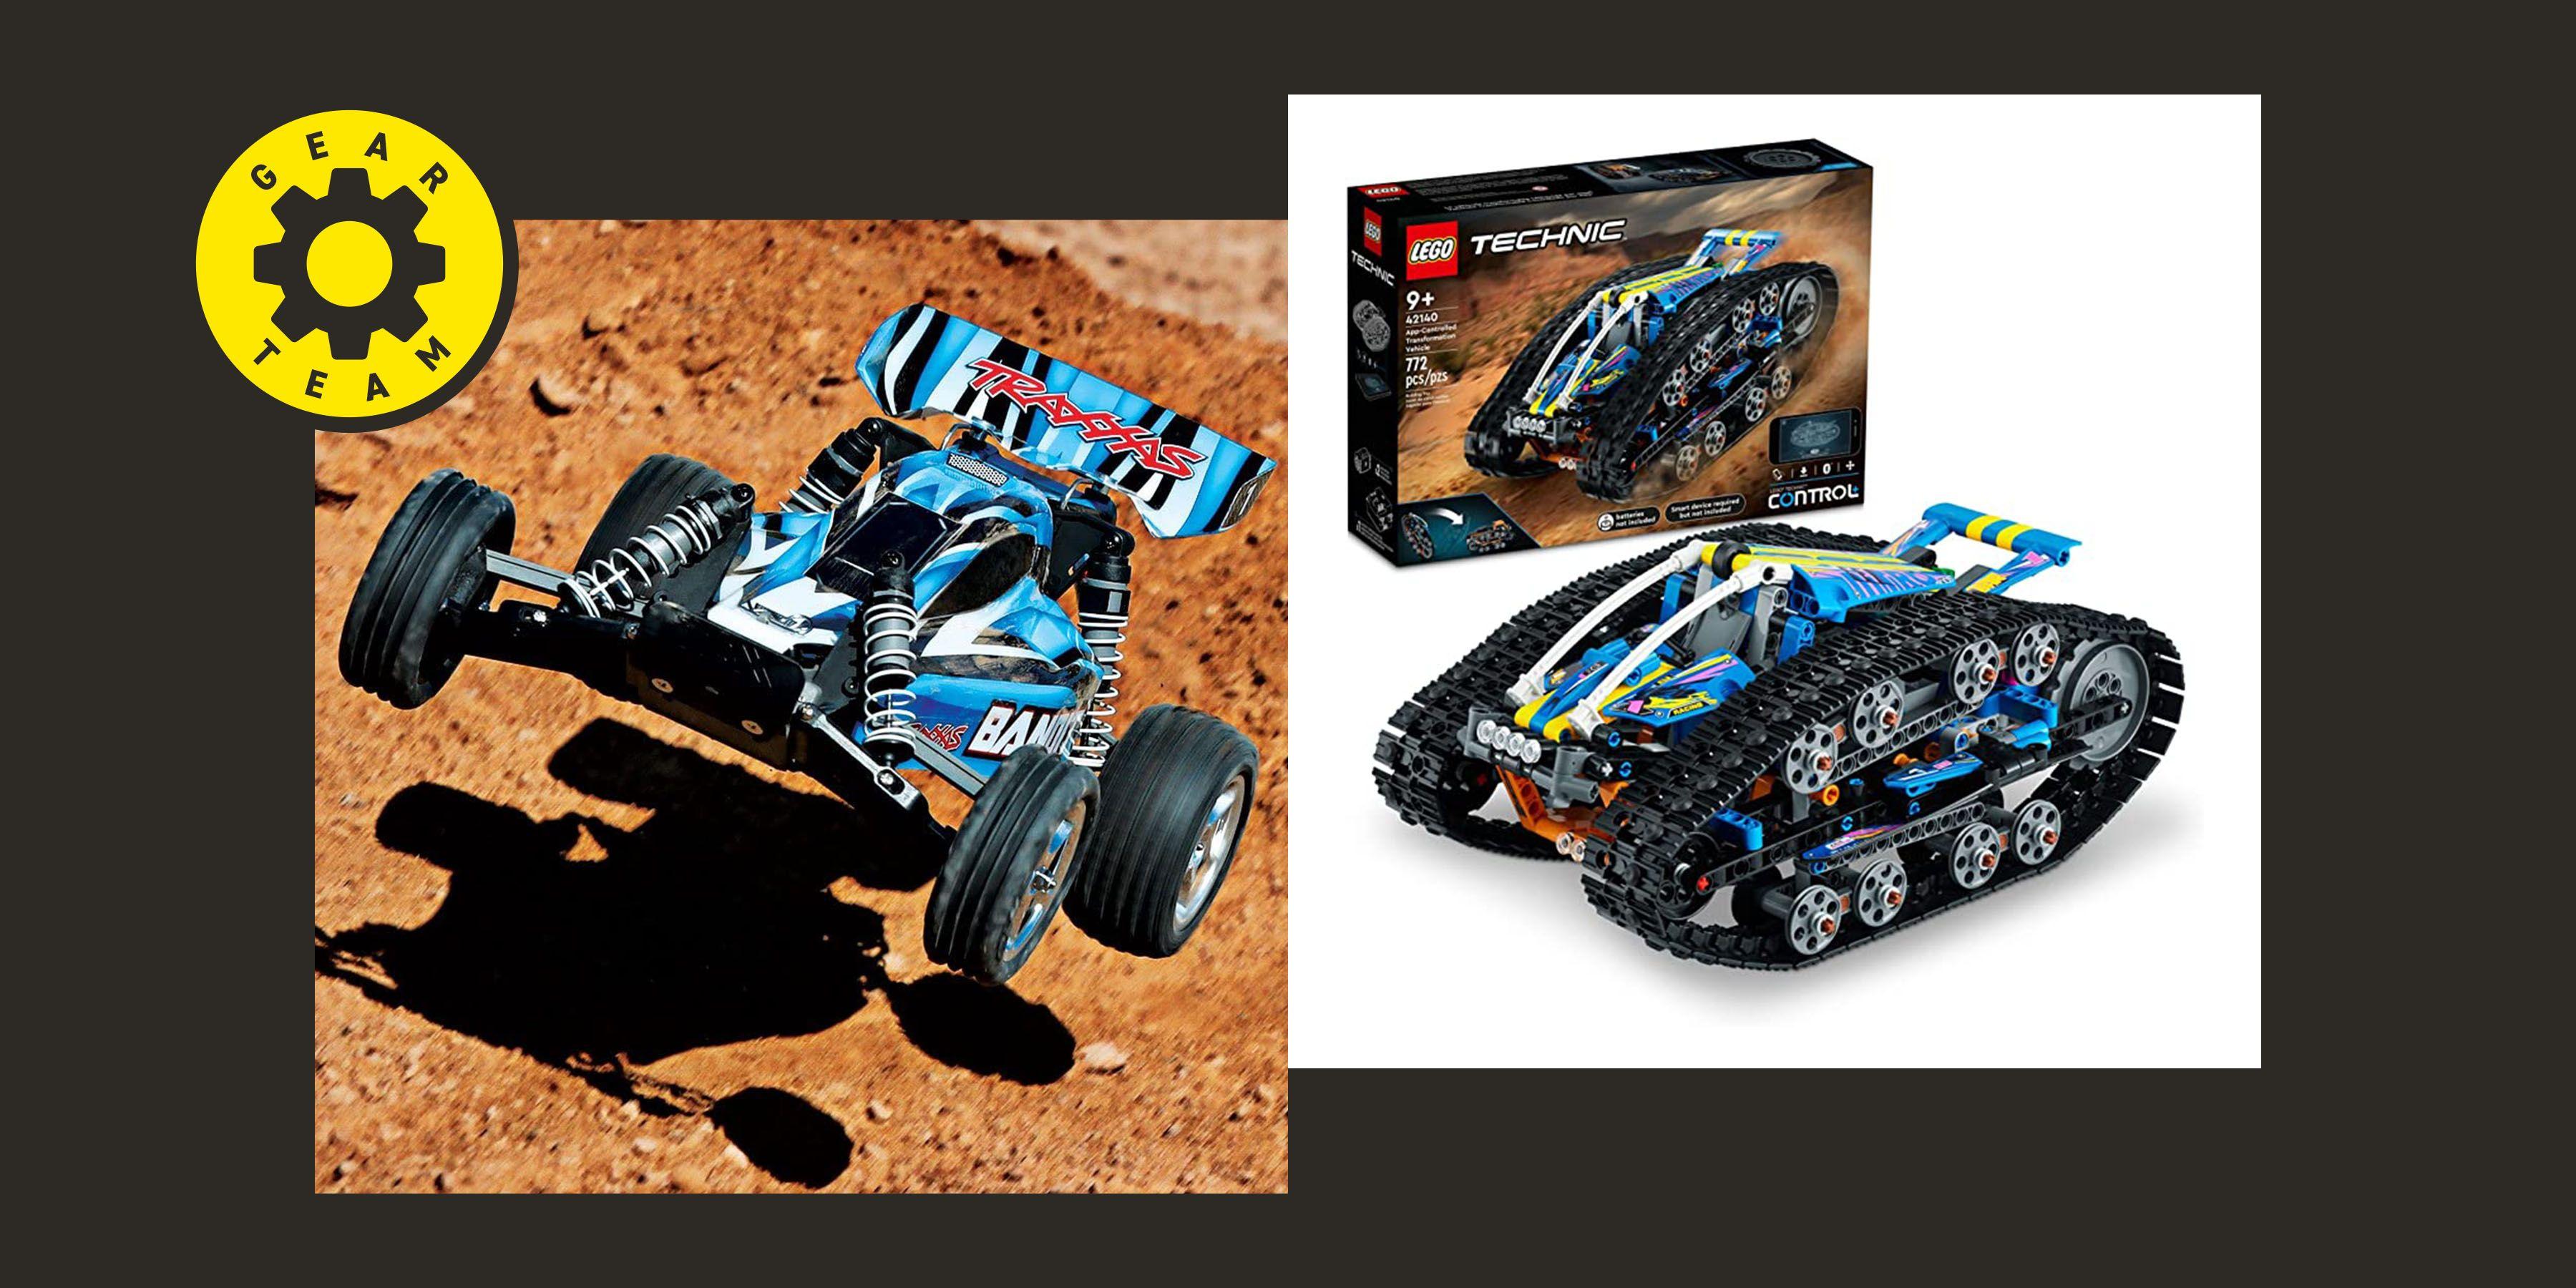 Big Remote Car: Large and Powerful: The Exciting World of Big Remote Cars